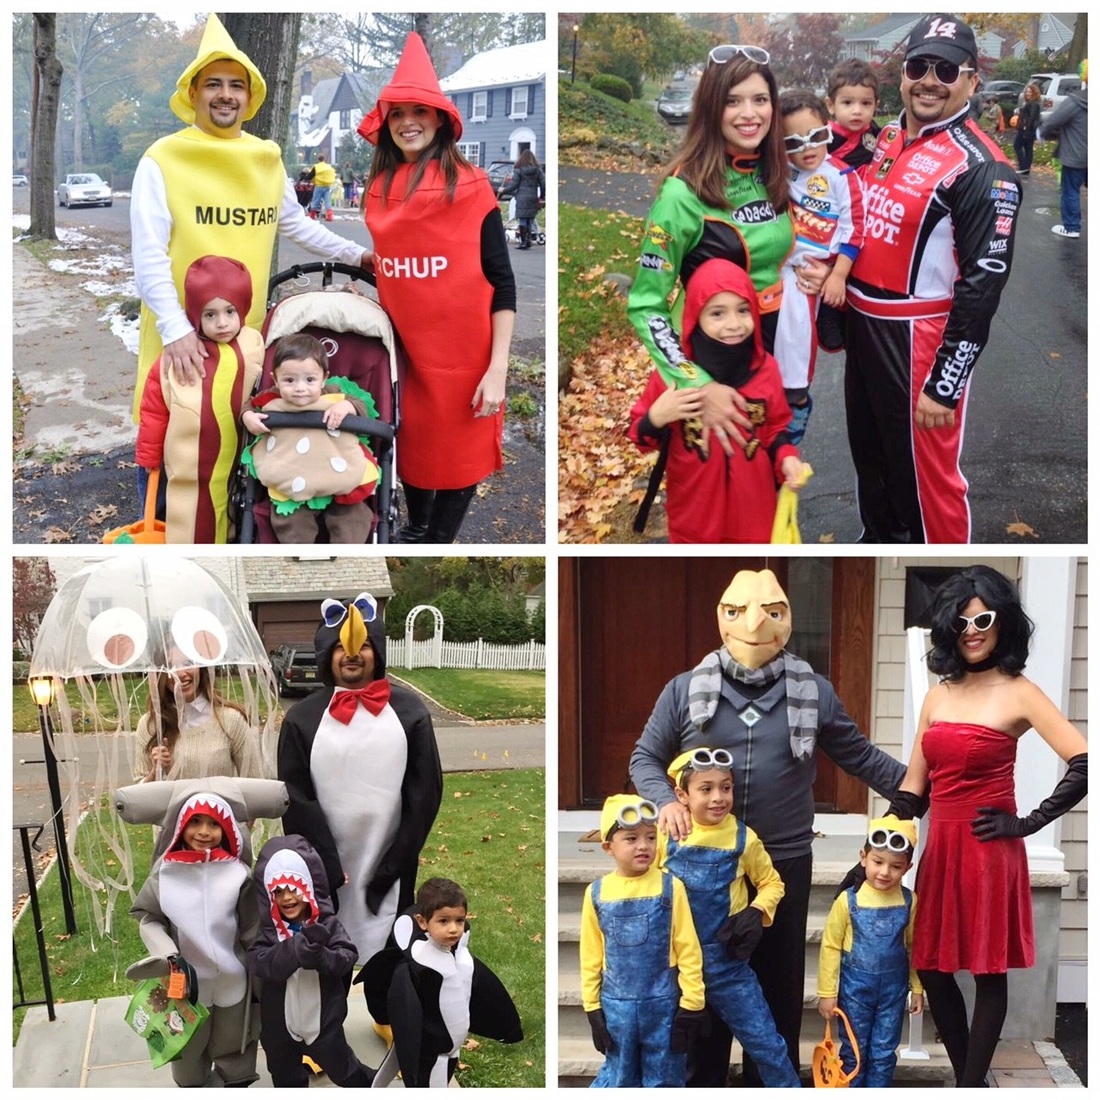 Alicia Gibbs: 12 DIY Family Themed Costumes - Condiments, Racecar Drivers, Under the Sea + Minions